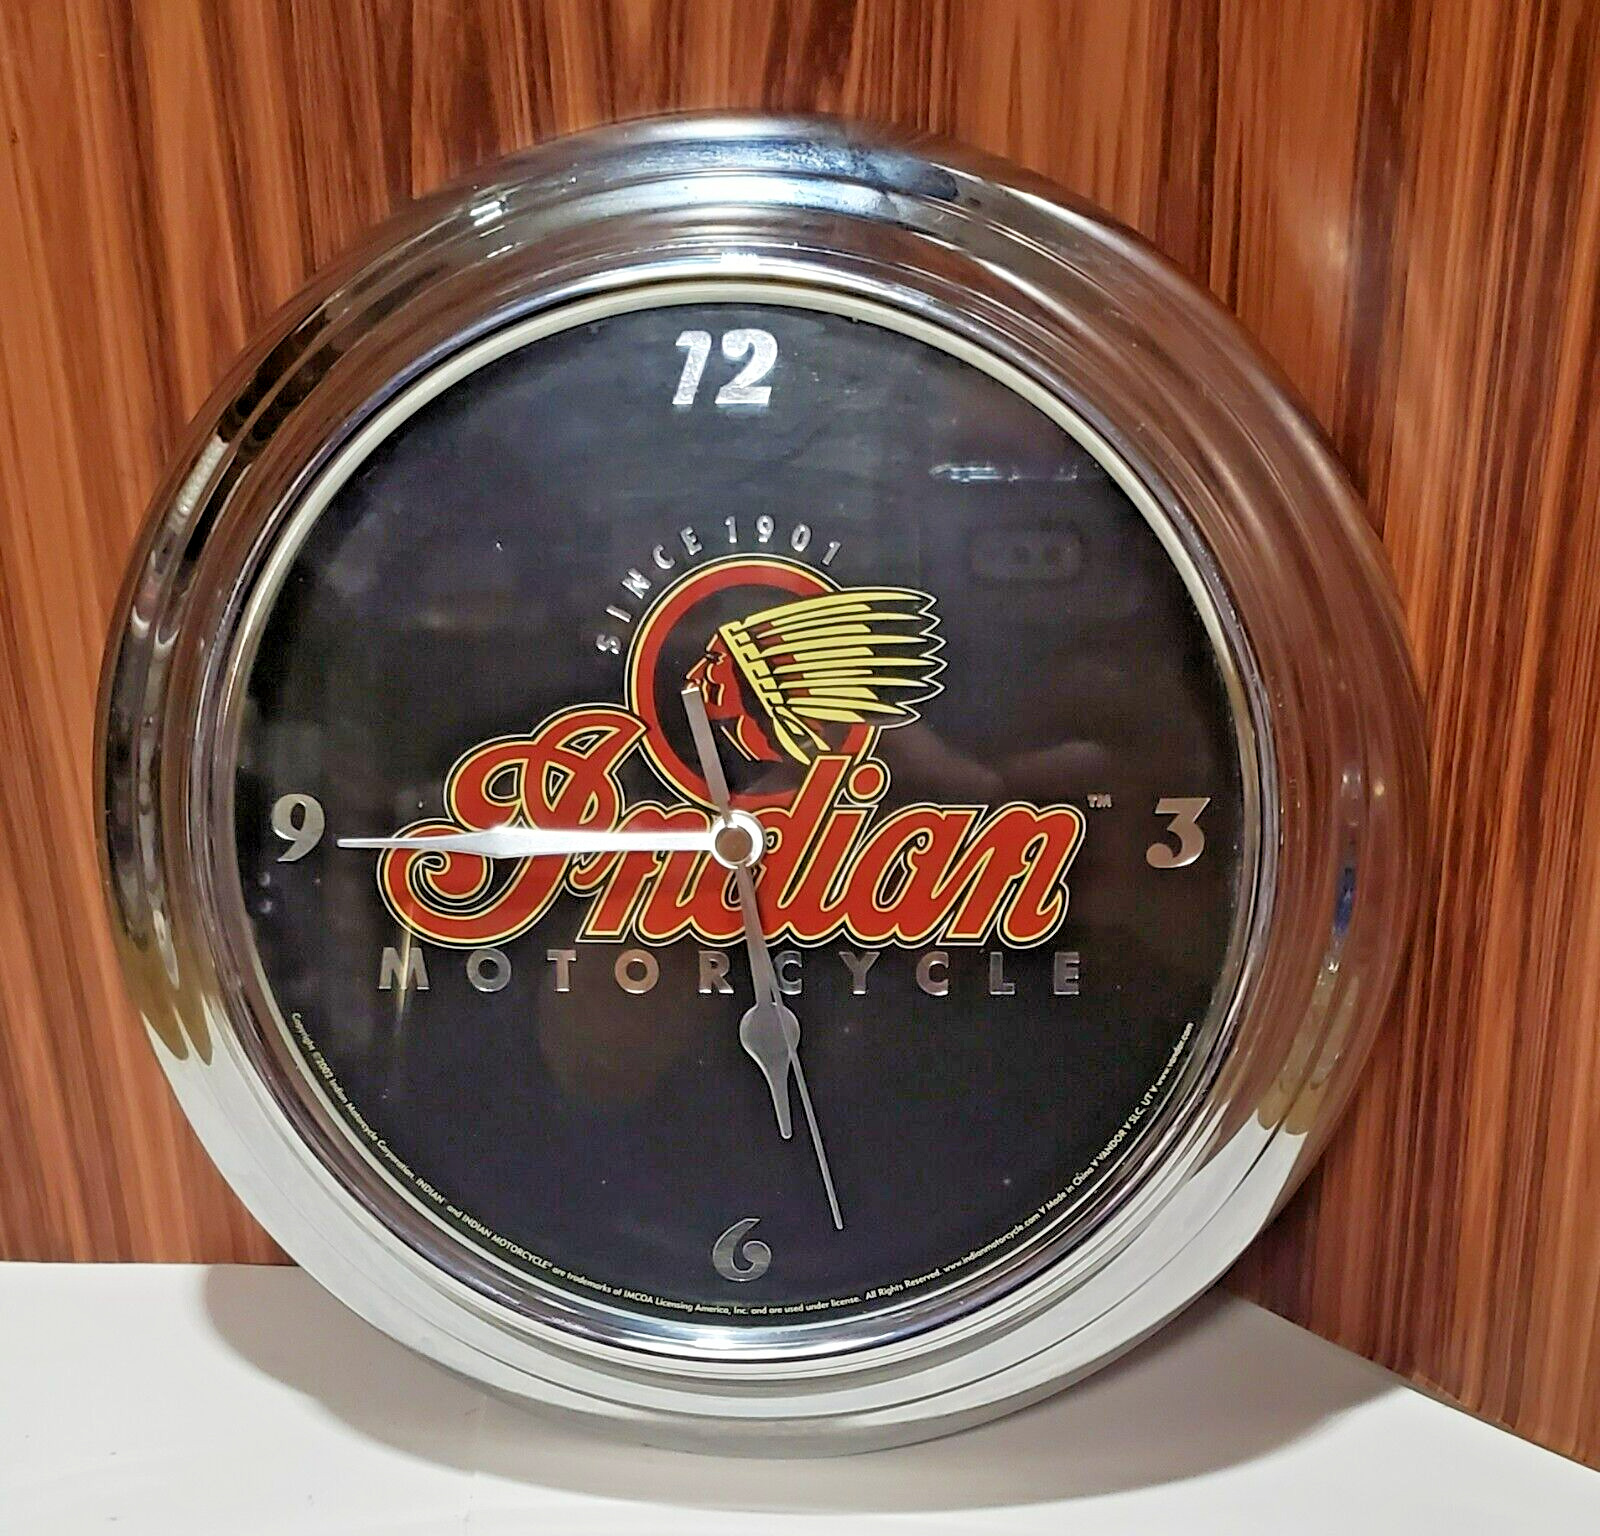 2002 Indian motorcycle clock battery operated. Tested, works.